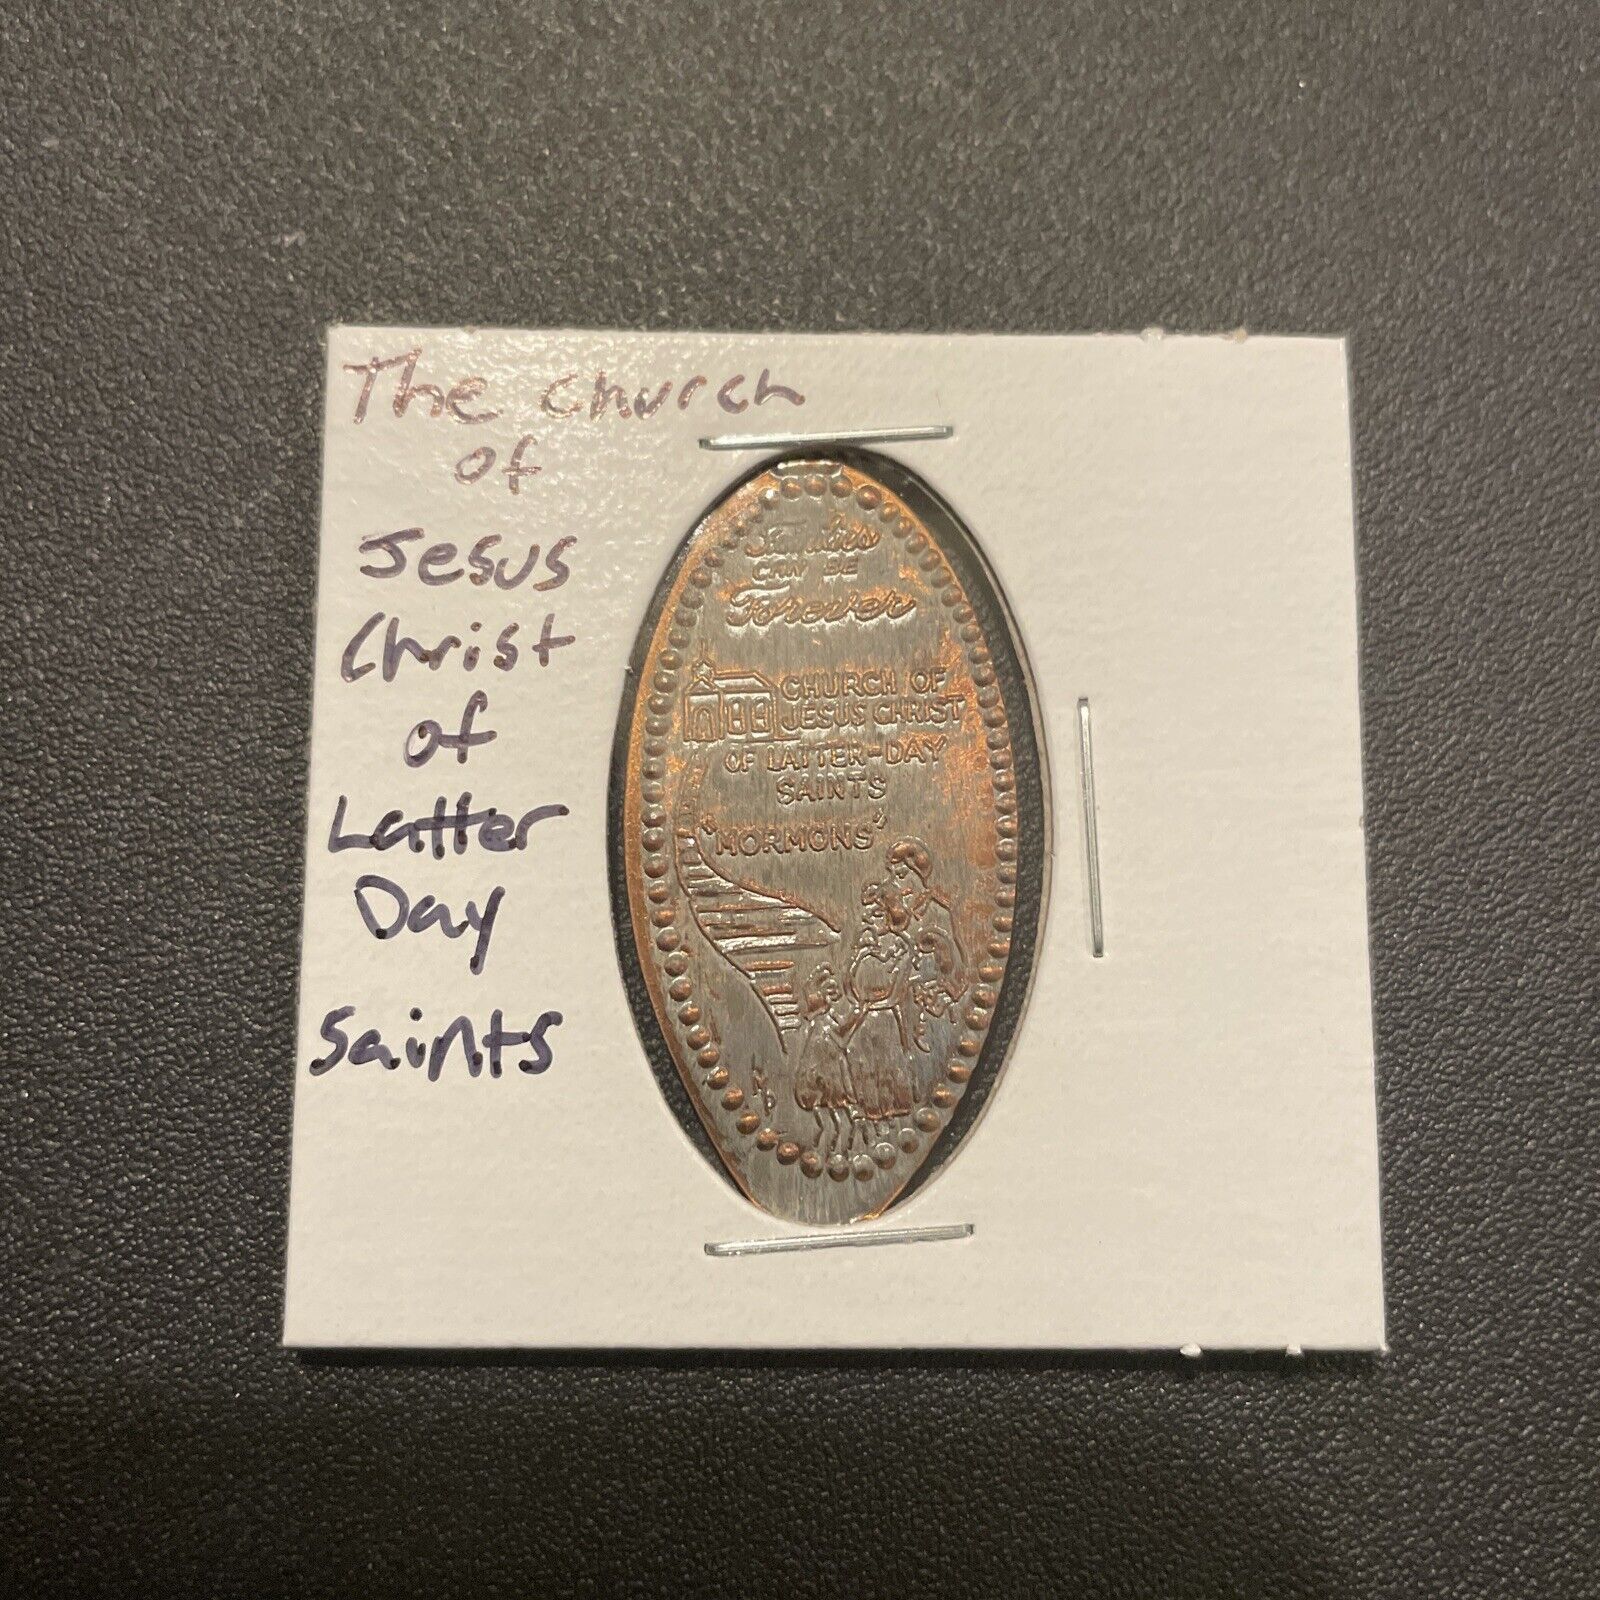 the church of Jesus Christ of Latter Day Saints elongated penny